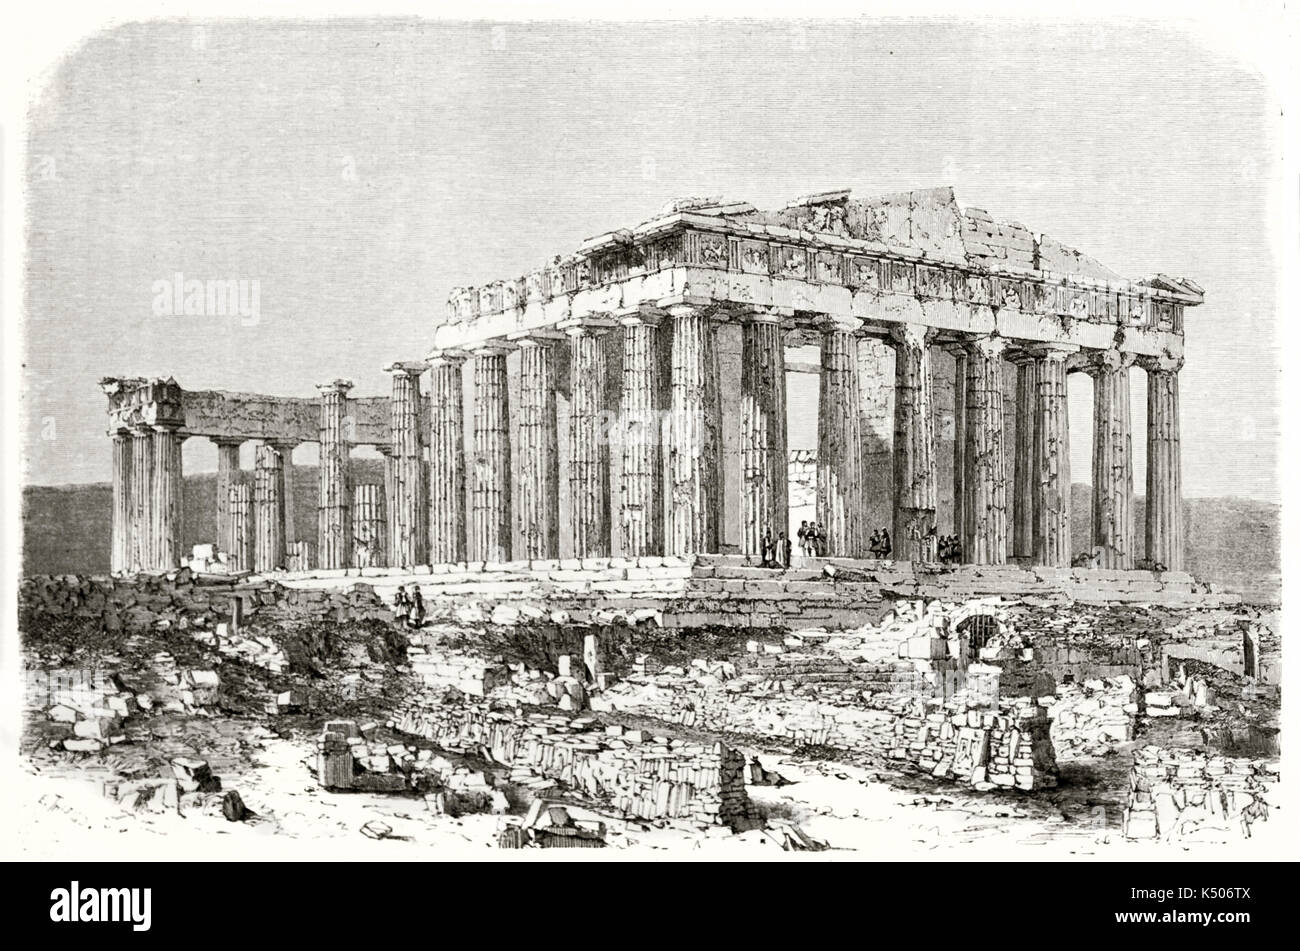 Ancient famous ruins of the greek temple temple Parthenon Athens. Full picture. Illustration executed in gray tones By Therond after photo by unknown author published on Le Tour du Monde Paris 1862 Stock Photo